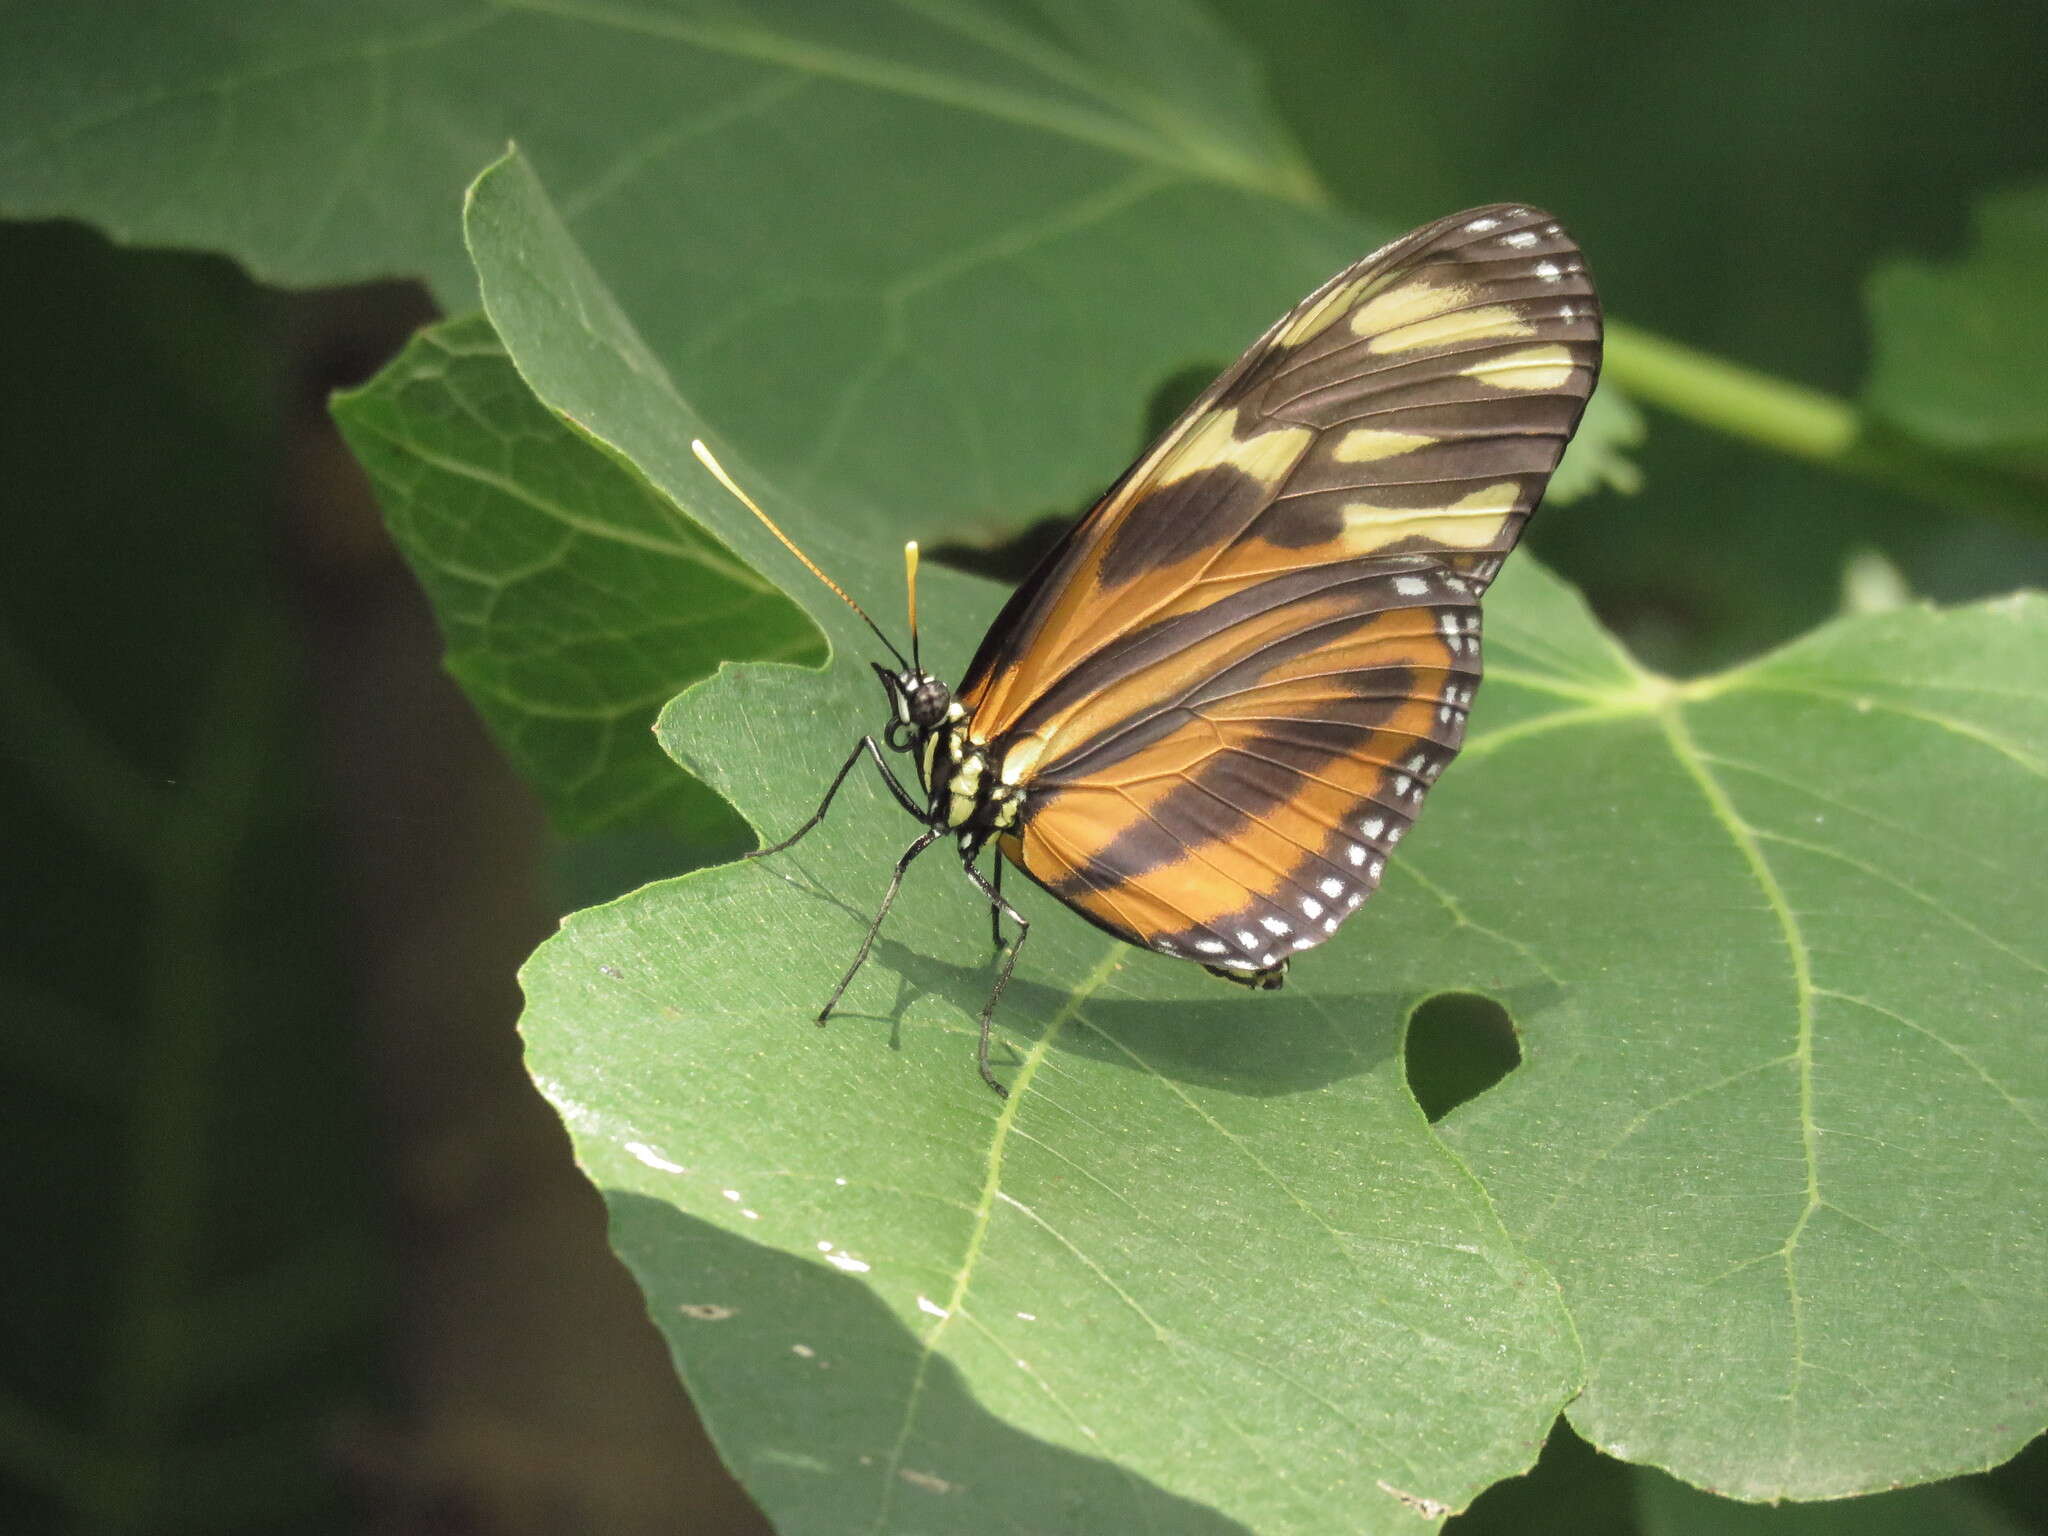 Image of Isabella’s Longwing